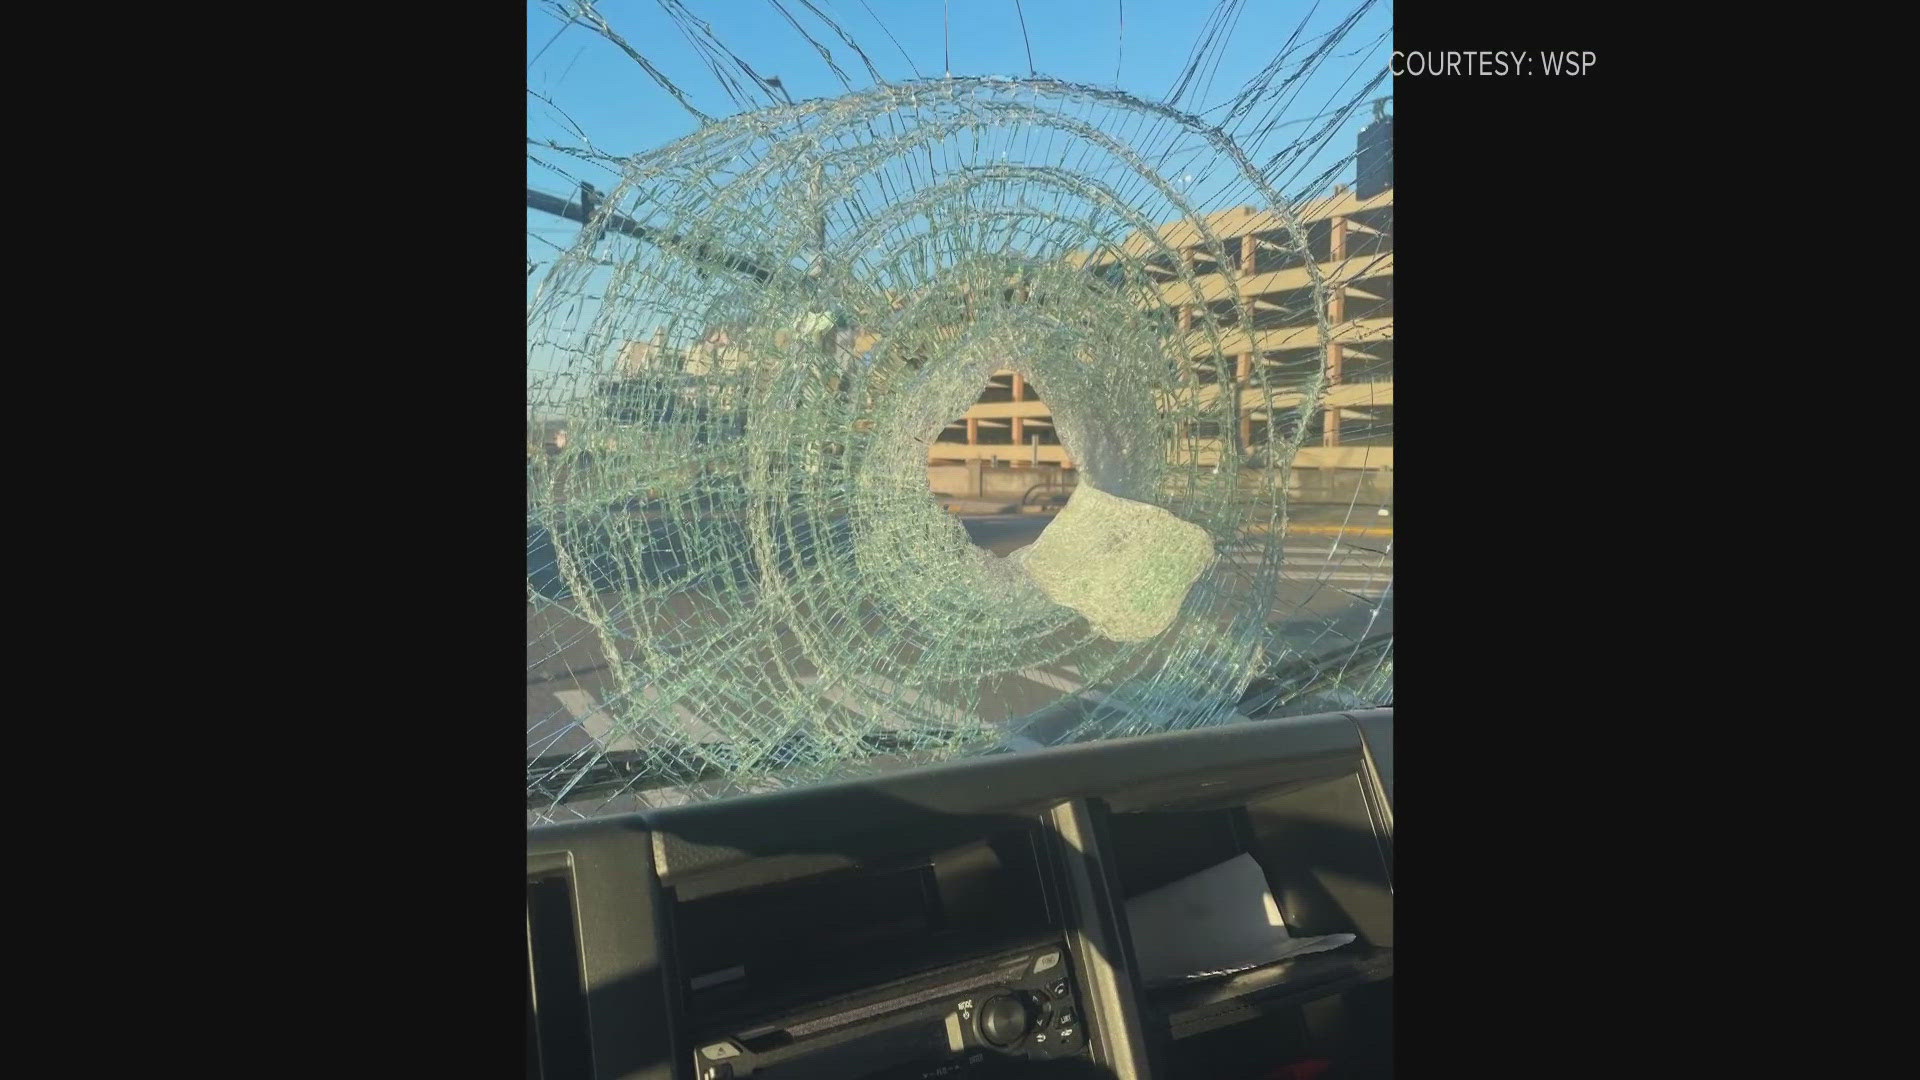 A driver was traveling on the interstate near Rainier Avenue when someone threw a brick through the windshield.